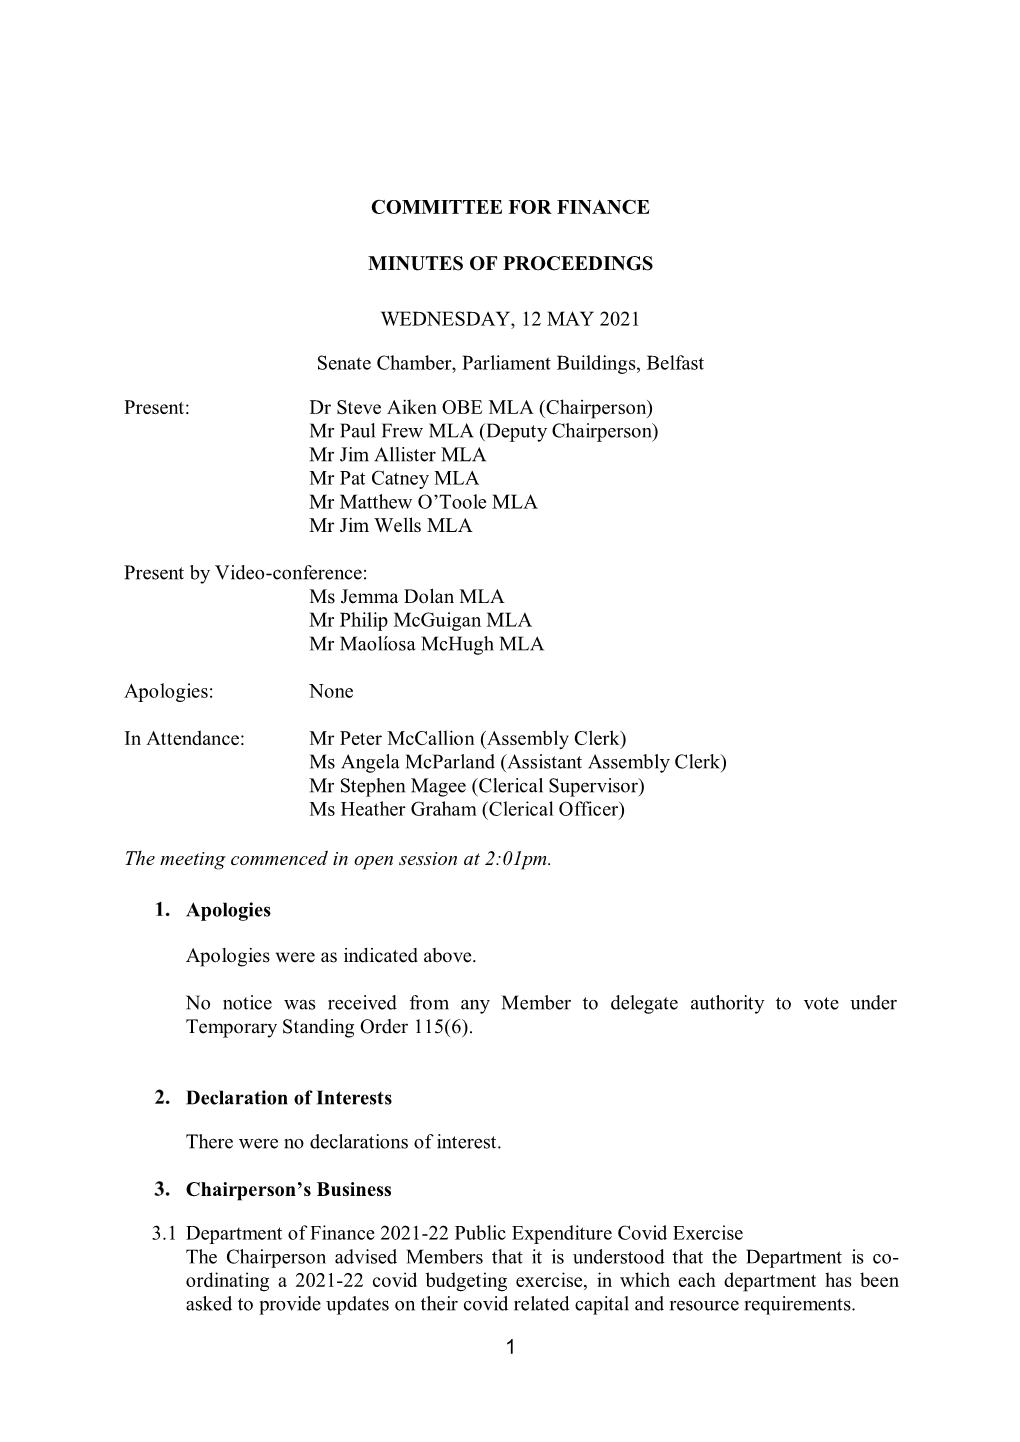 Minutes of Proceedings Template